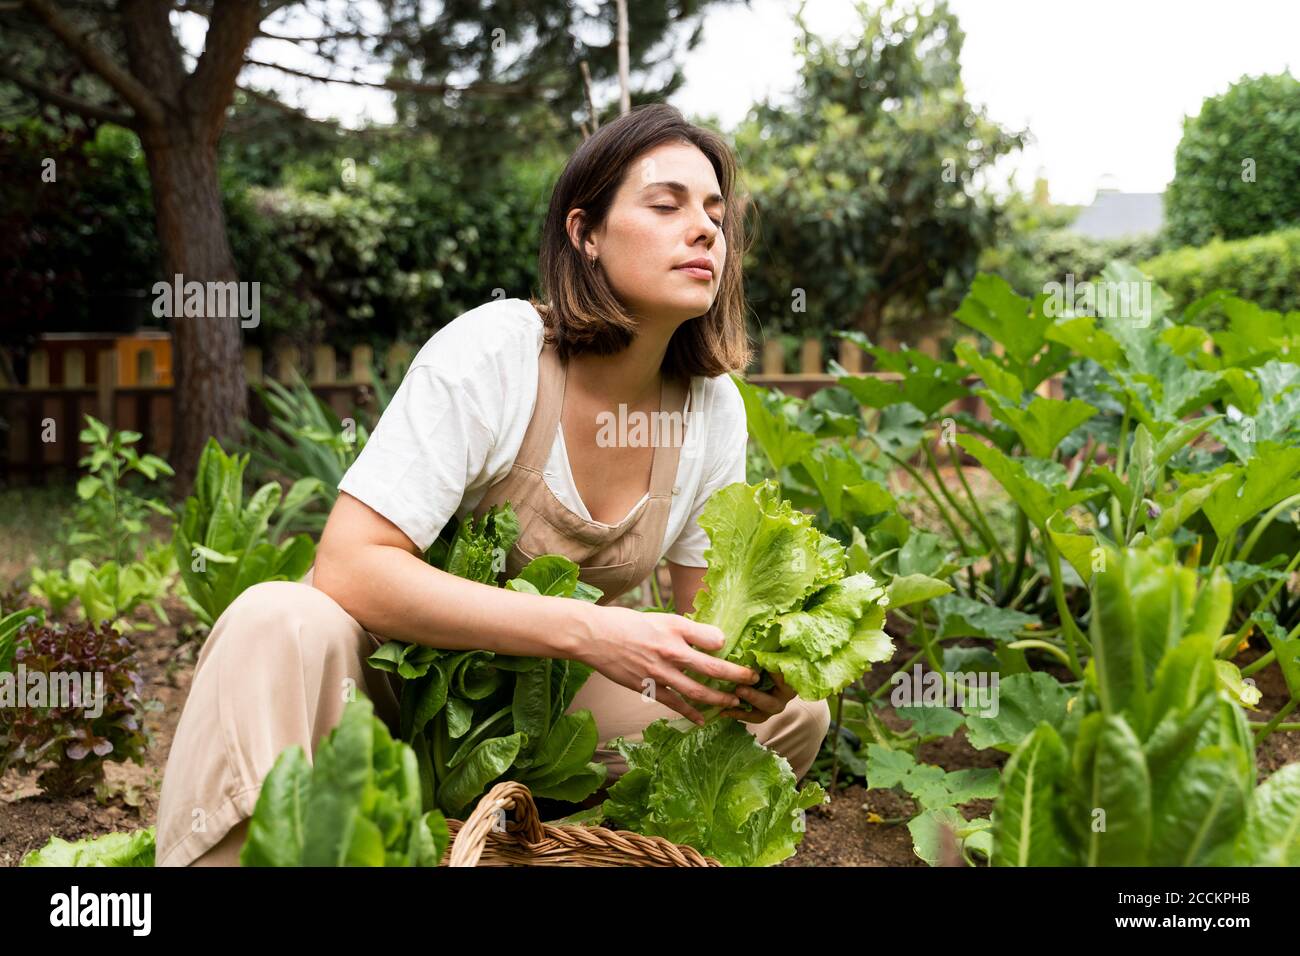 Young woman with eyes closed holding lettuce while crouching in vegetable garden Stock Photo